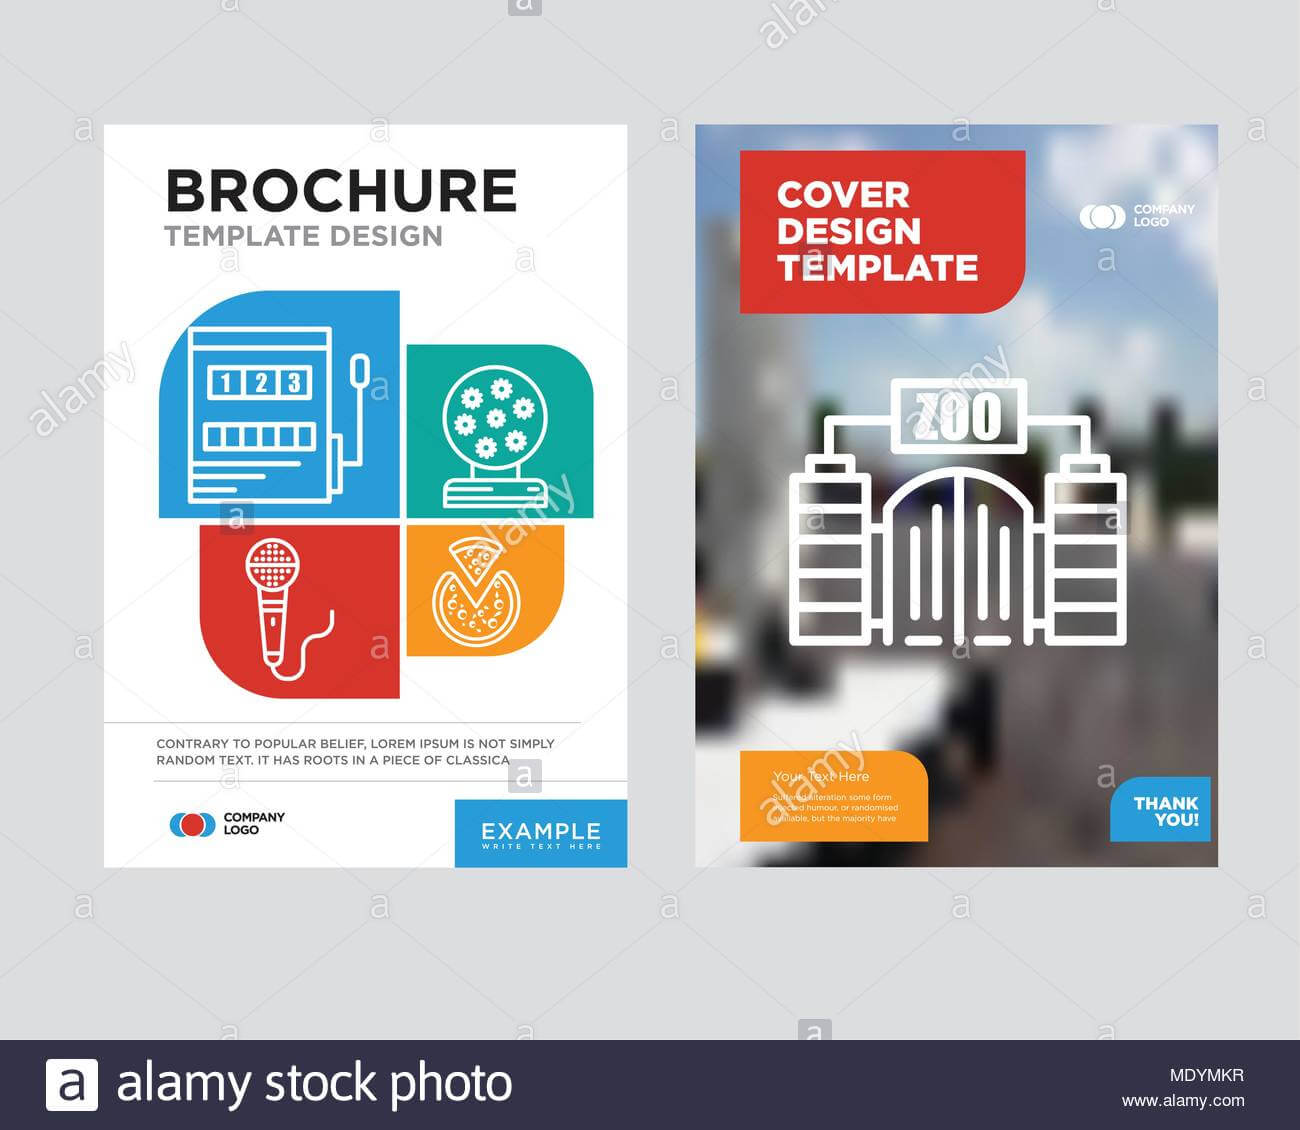 Zoo Brochure Flyer Design Template With Abstract Photo For Zoo Brochure Template